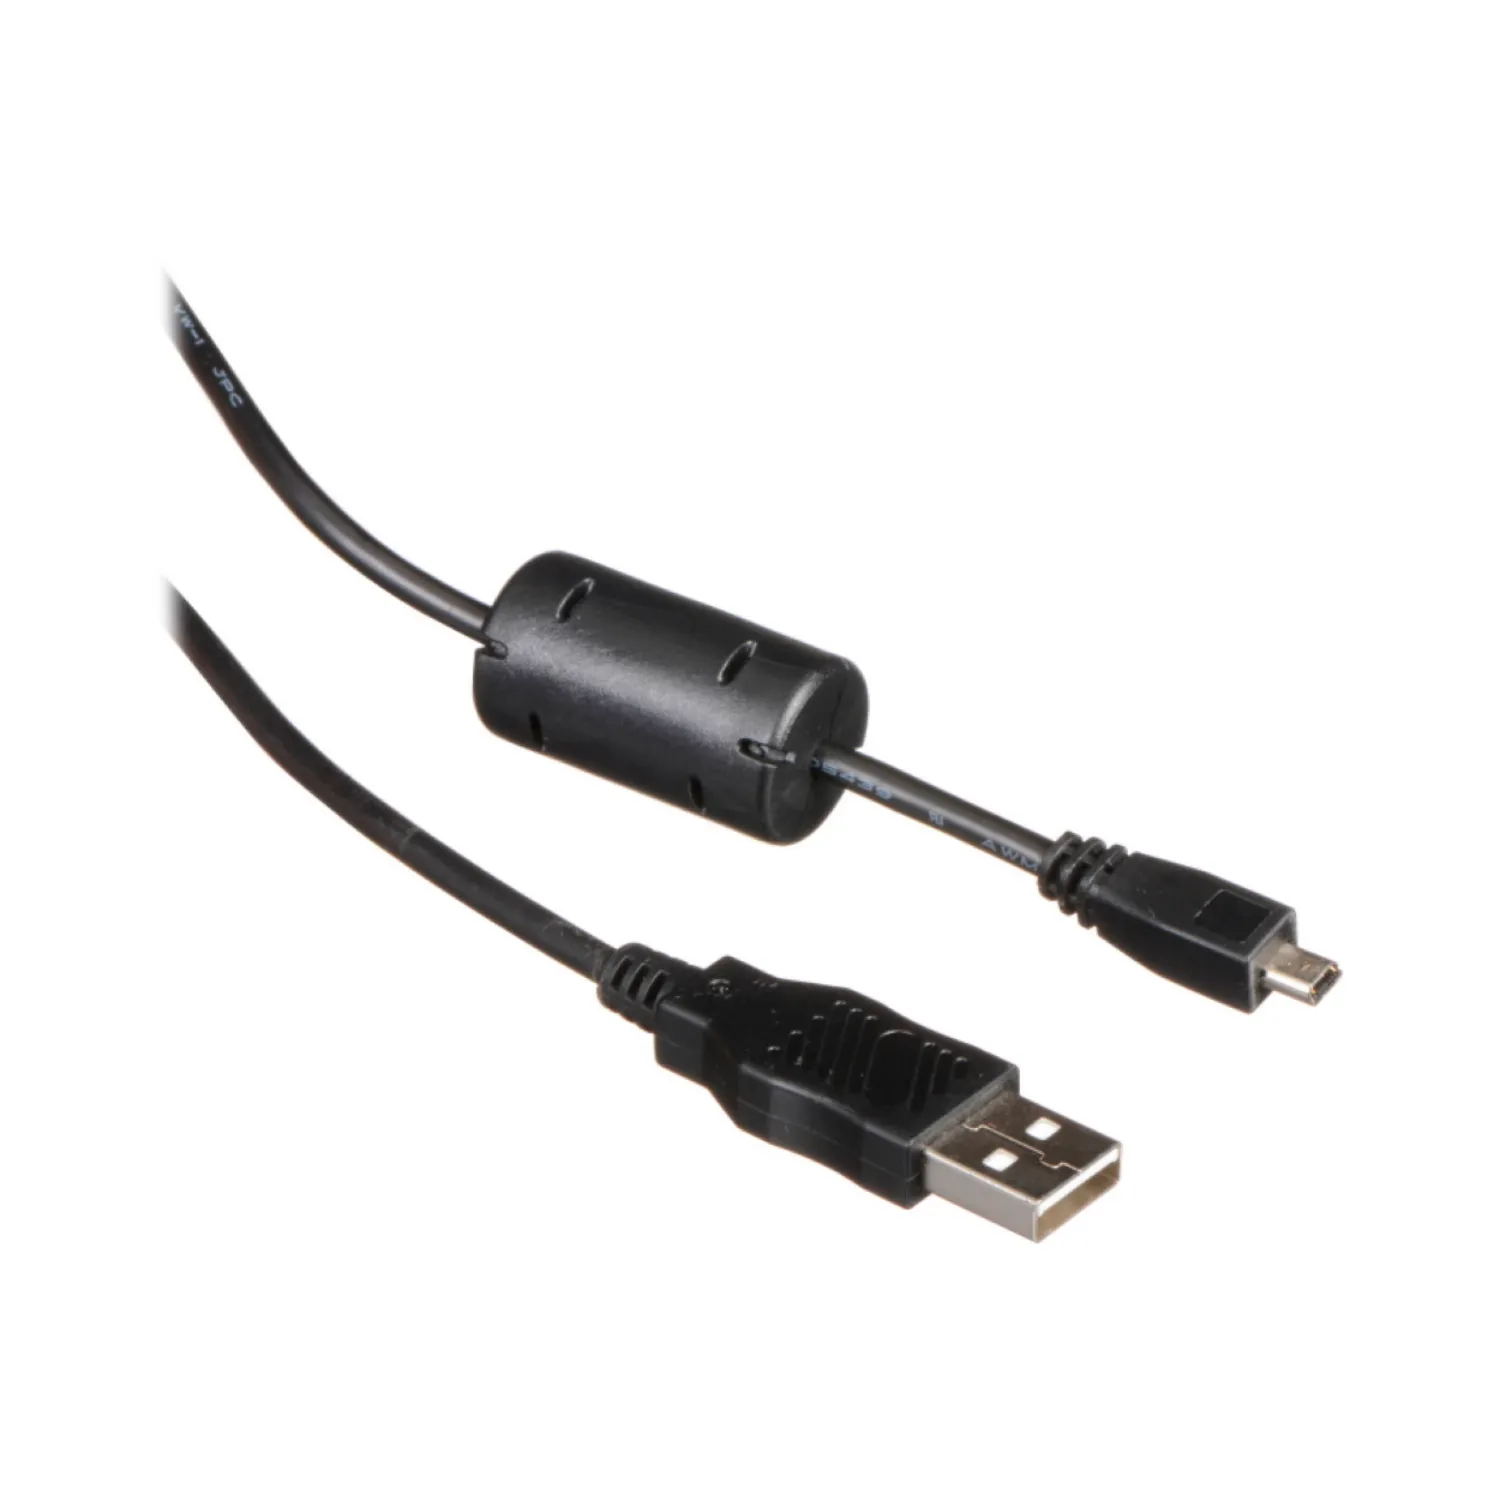 Sigma USB Cable for MC-11 and USB Dock